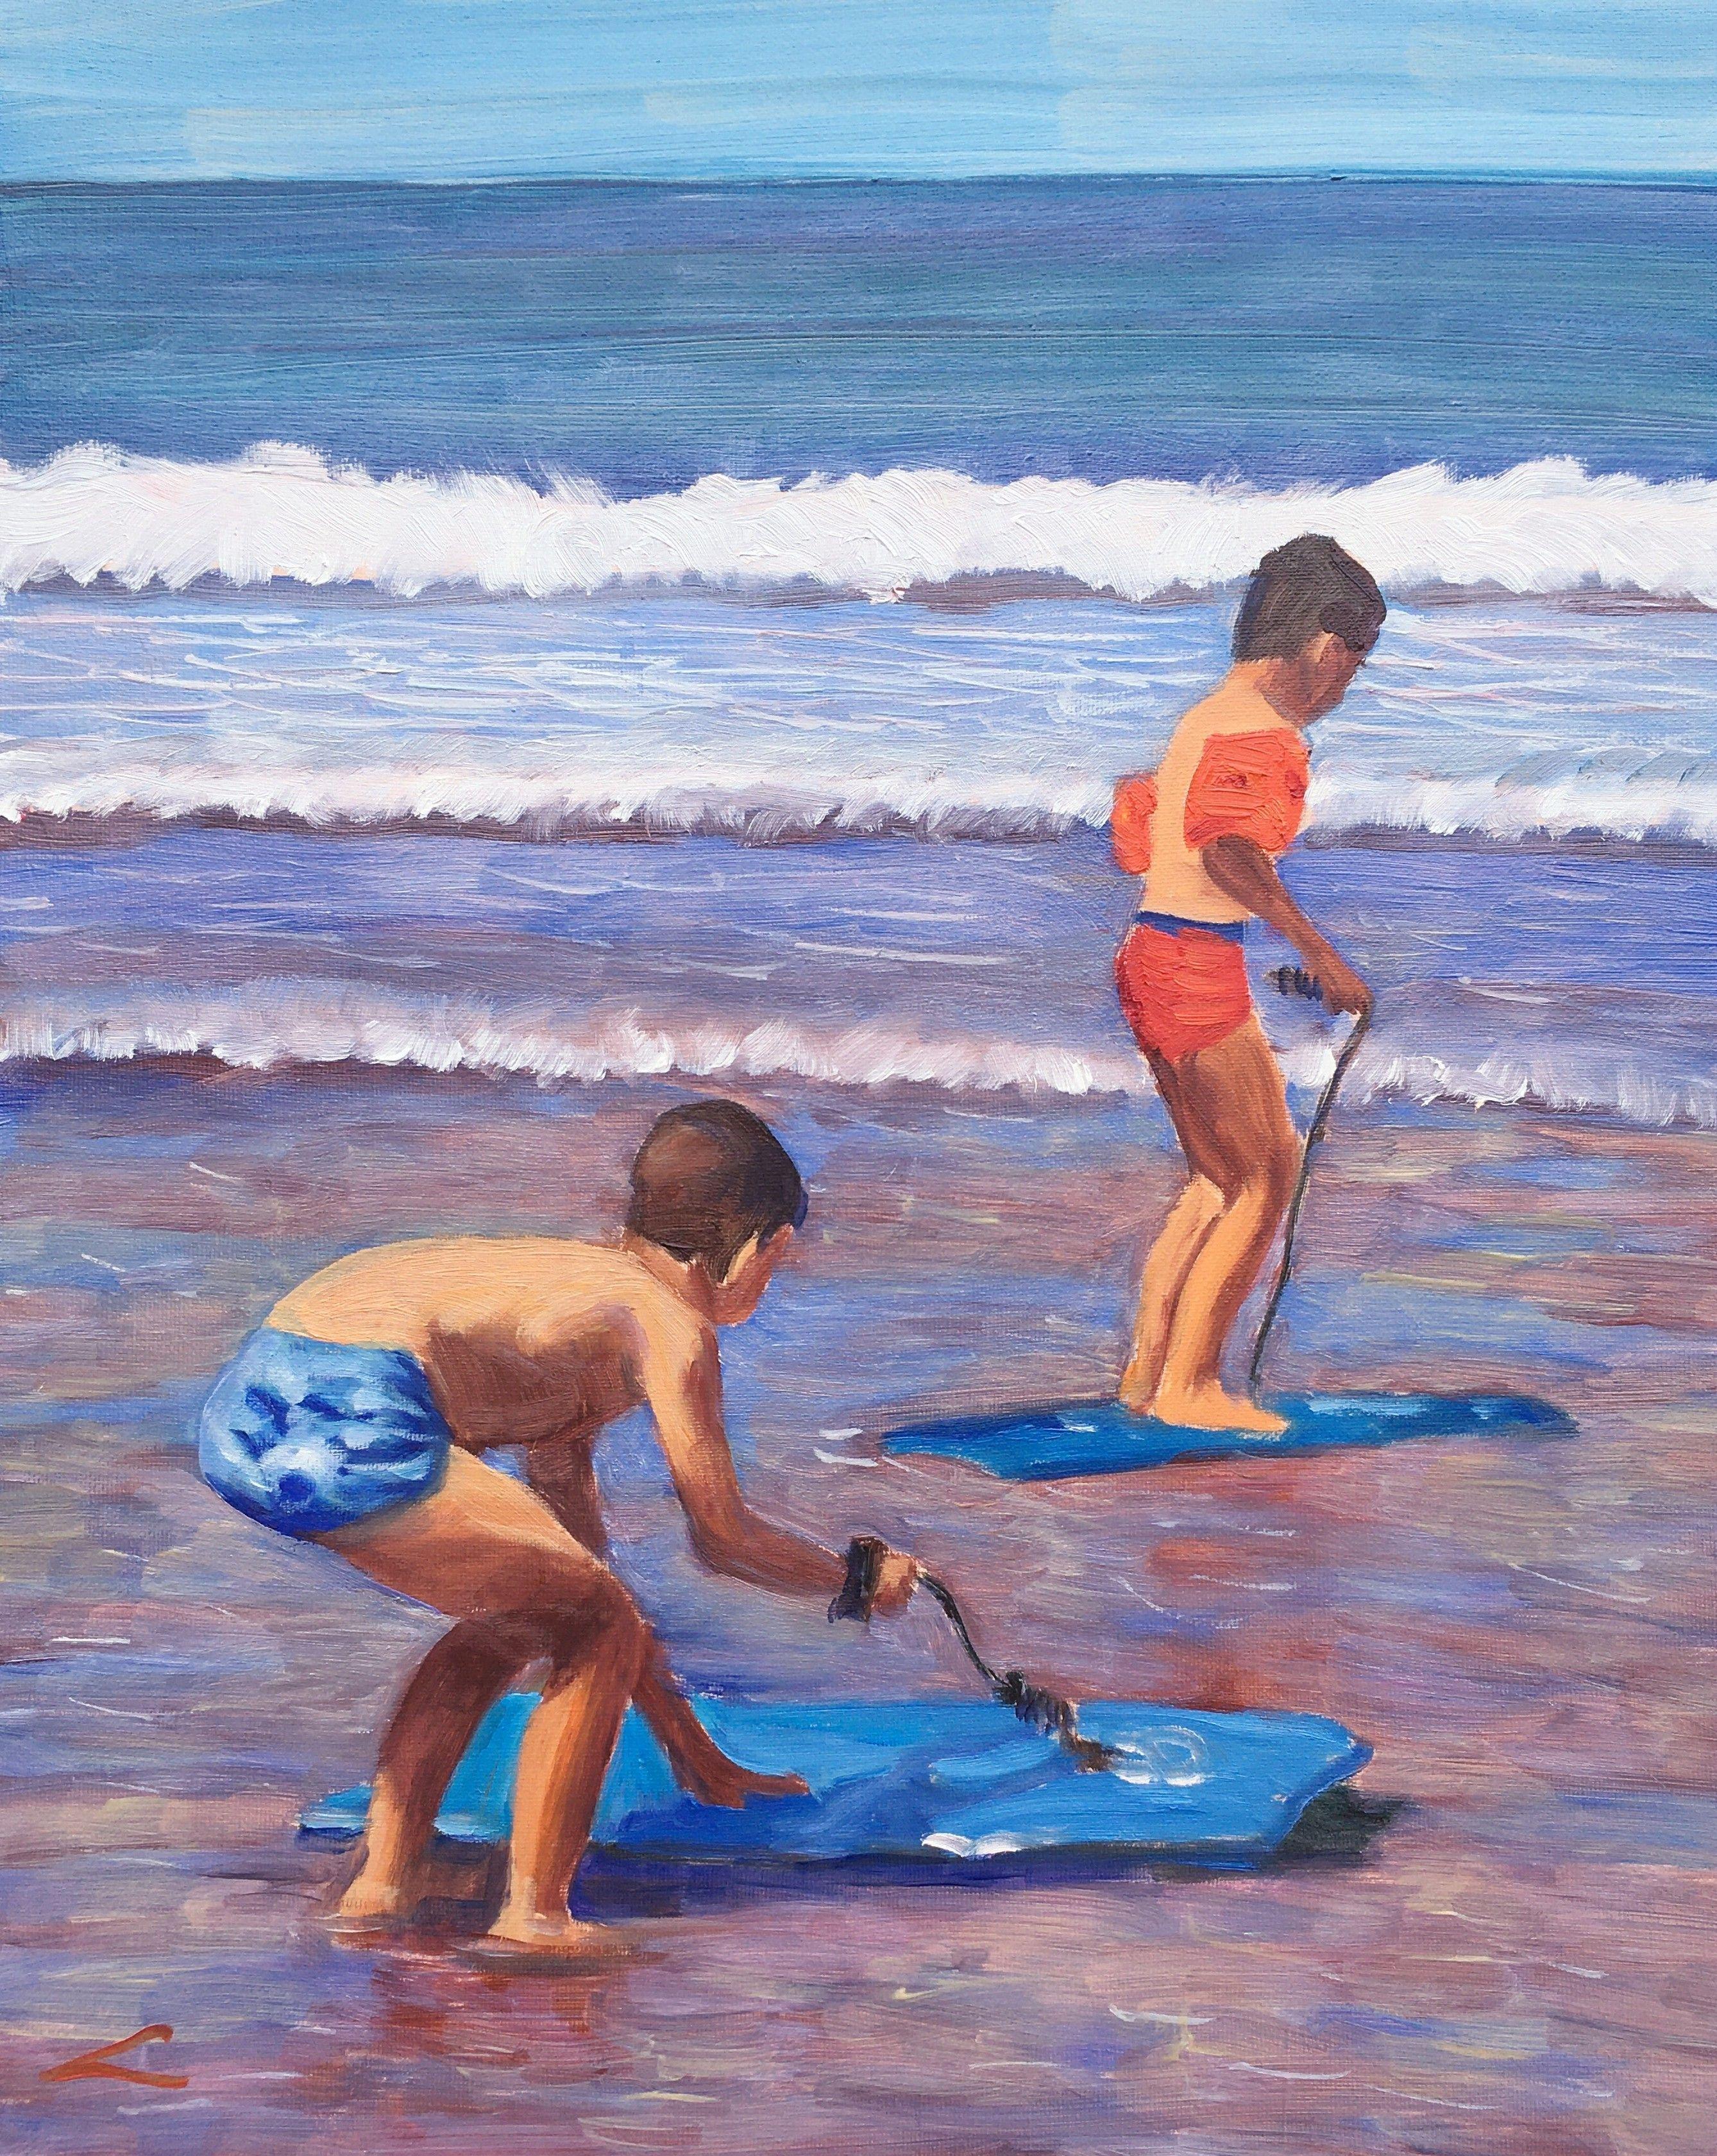 Two boys at the sea. Alla prima oil painting with few final tuches when dry.Beautiful weather with a big shining sun. And I'm standing there taking it all in.The many spectacular sights jump at my eyes. Kids and dogs run around and splash each other